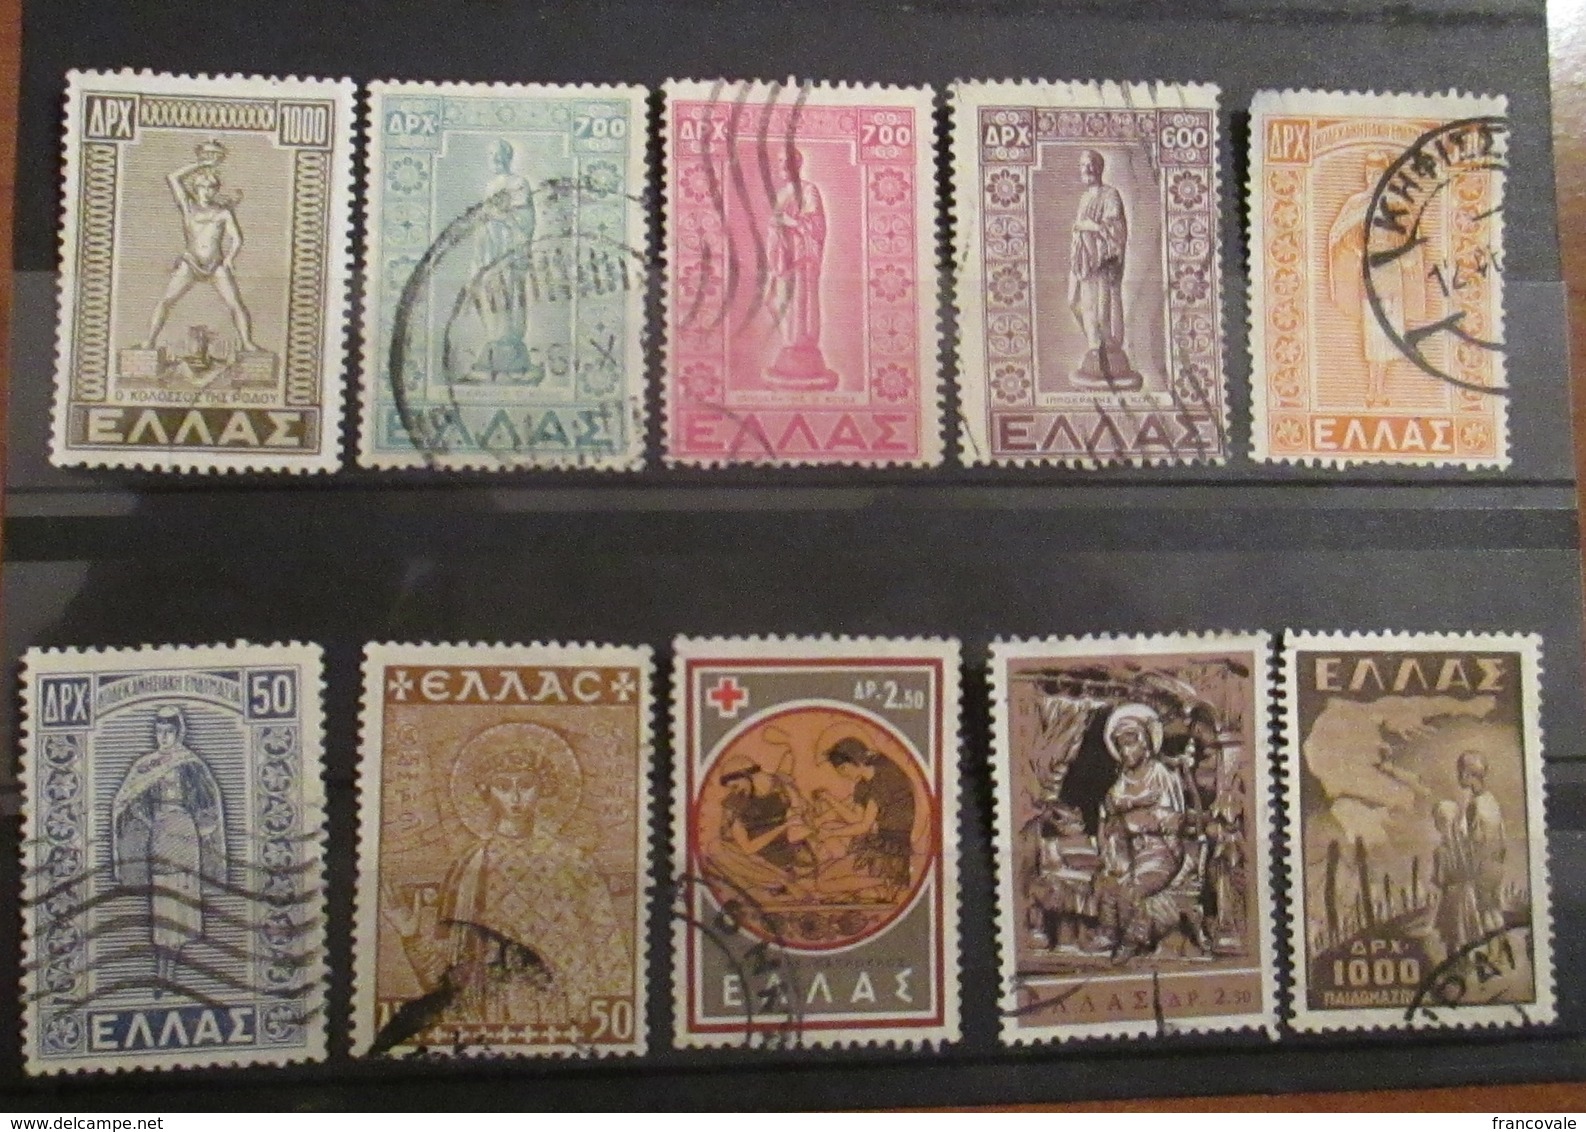 Grecia Greece 1945 - 1960 Statue Of Hippocrates And Other Stamps Used - Oblitérés